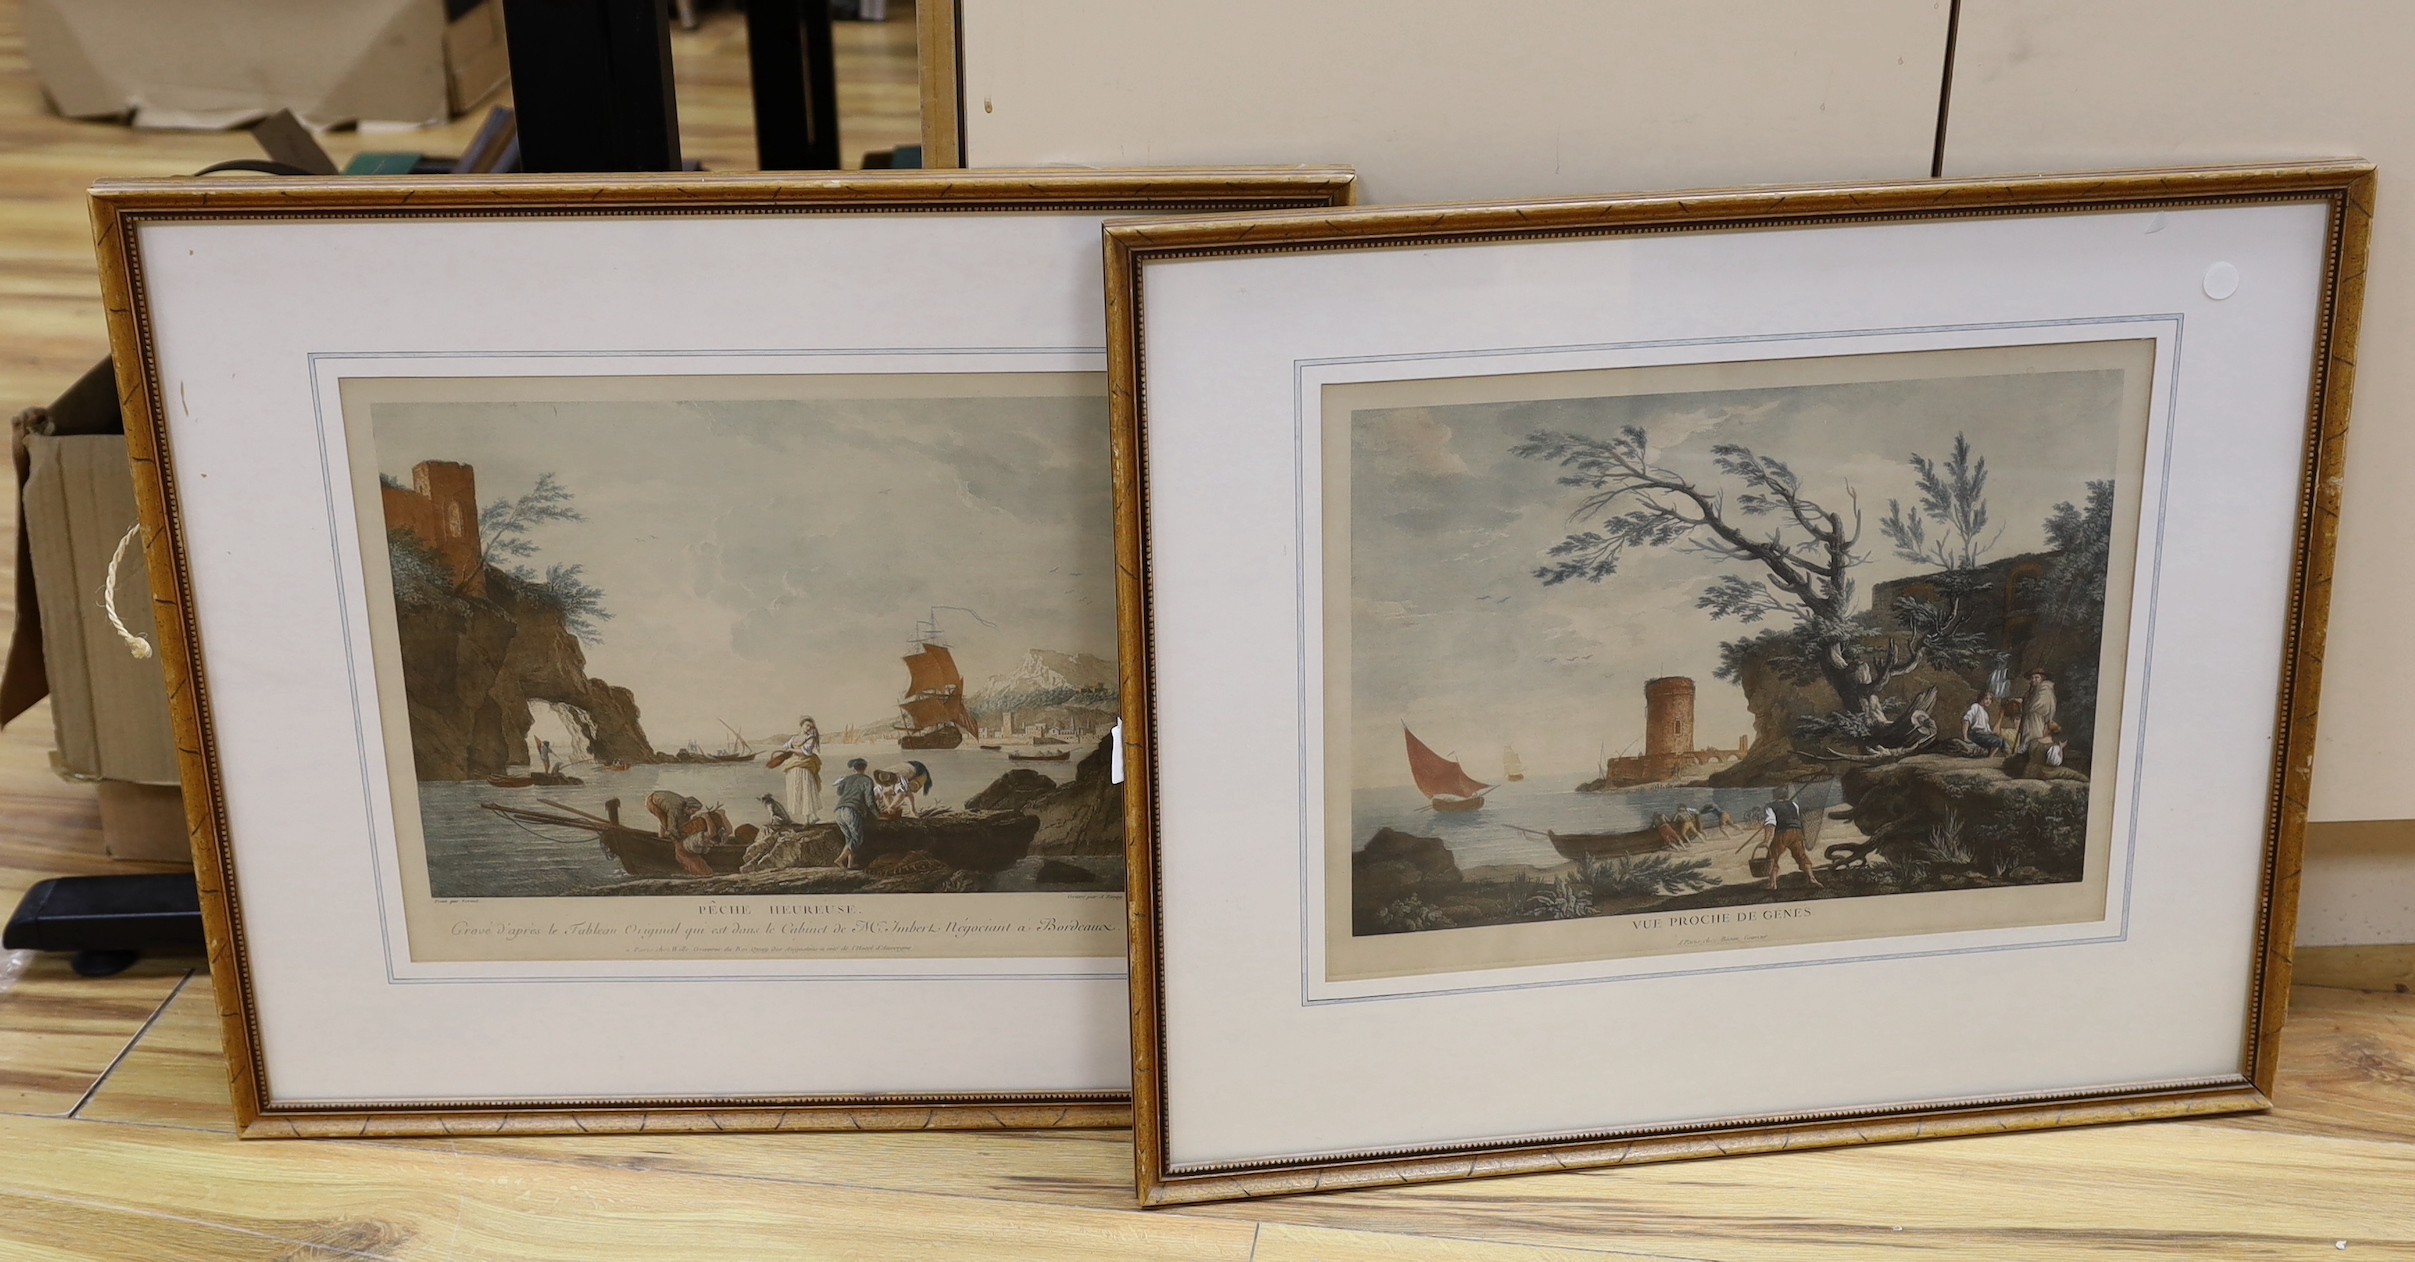 After Vernet, pair of reprinted engravings, 'Peche Heureuse' and 'Vue Proche du Genes', overall 33 x 44cm                                                                                                                   